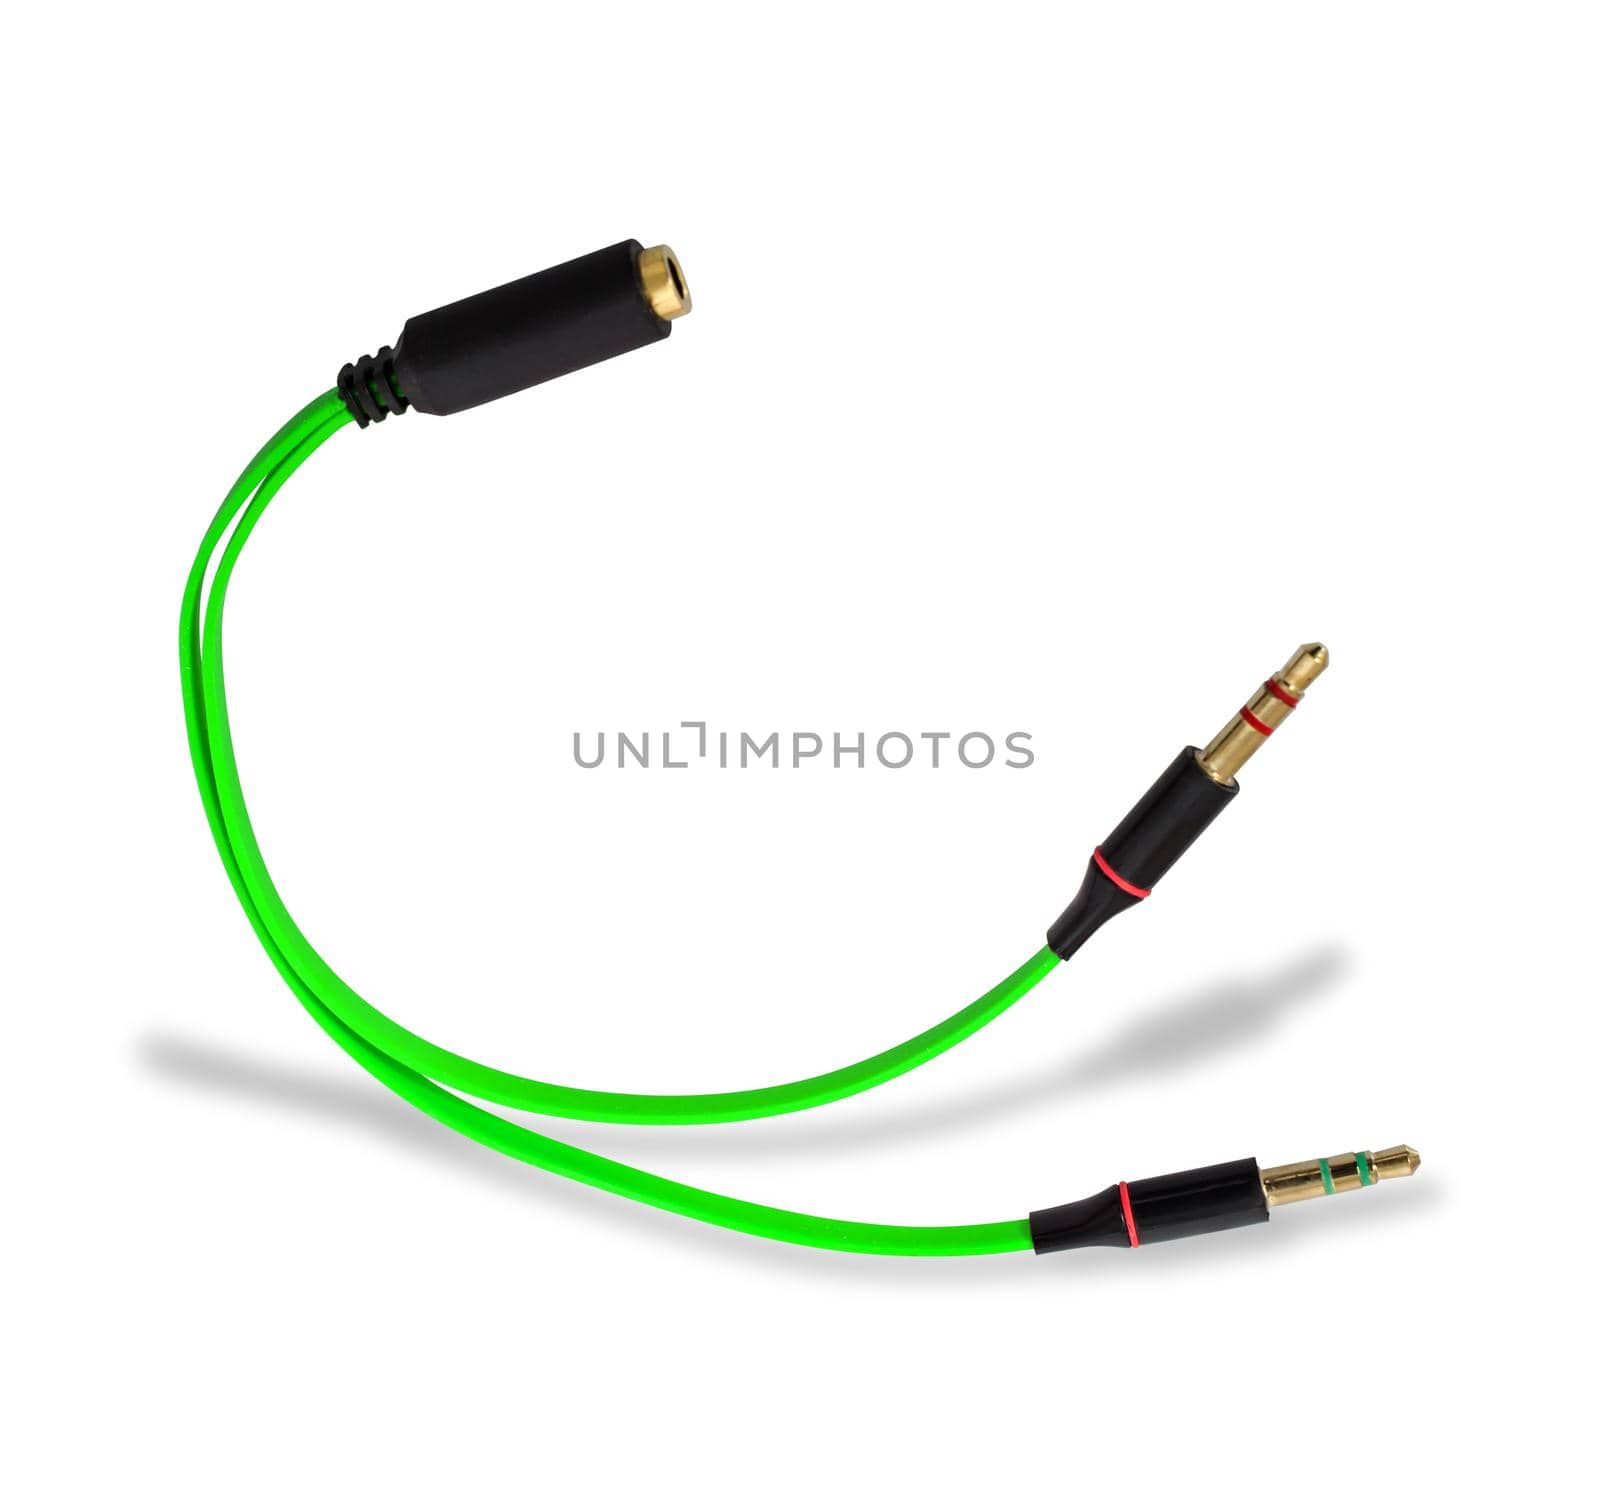 audio cable, adapter cord on white background with shadow